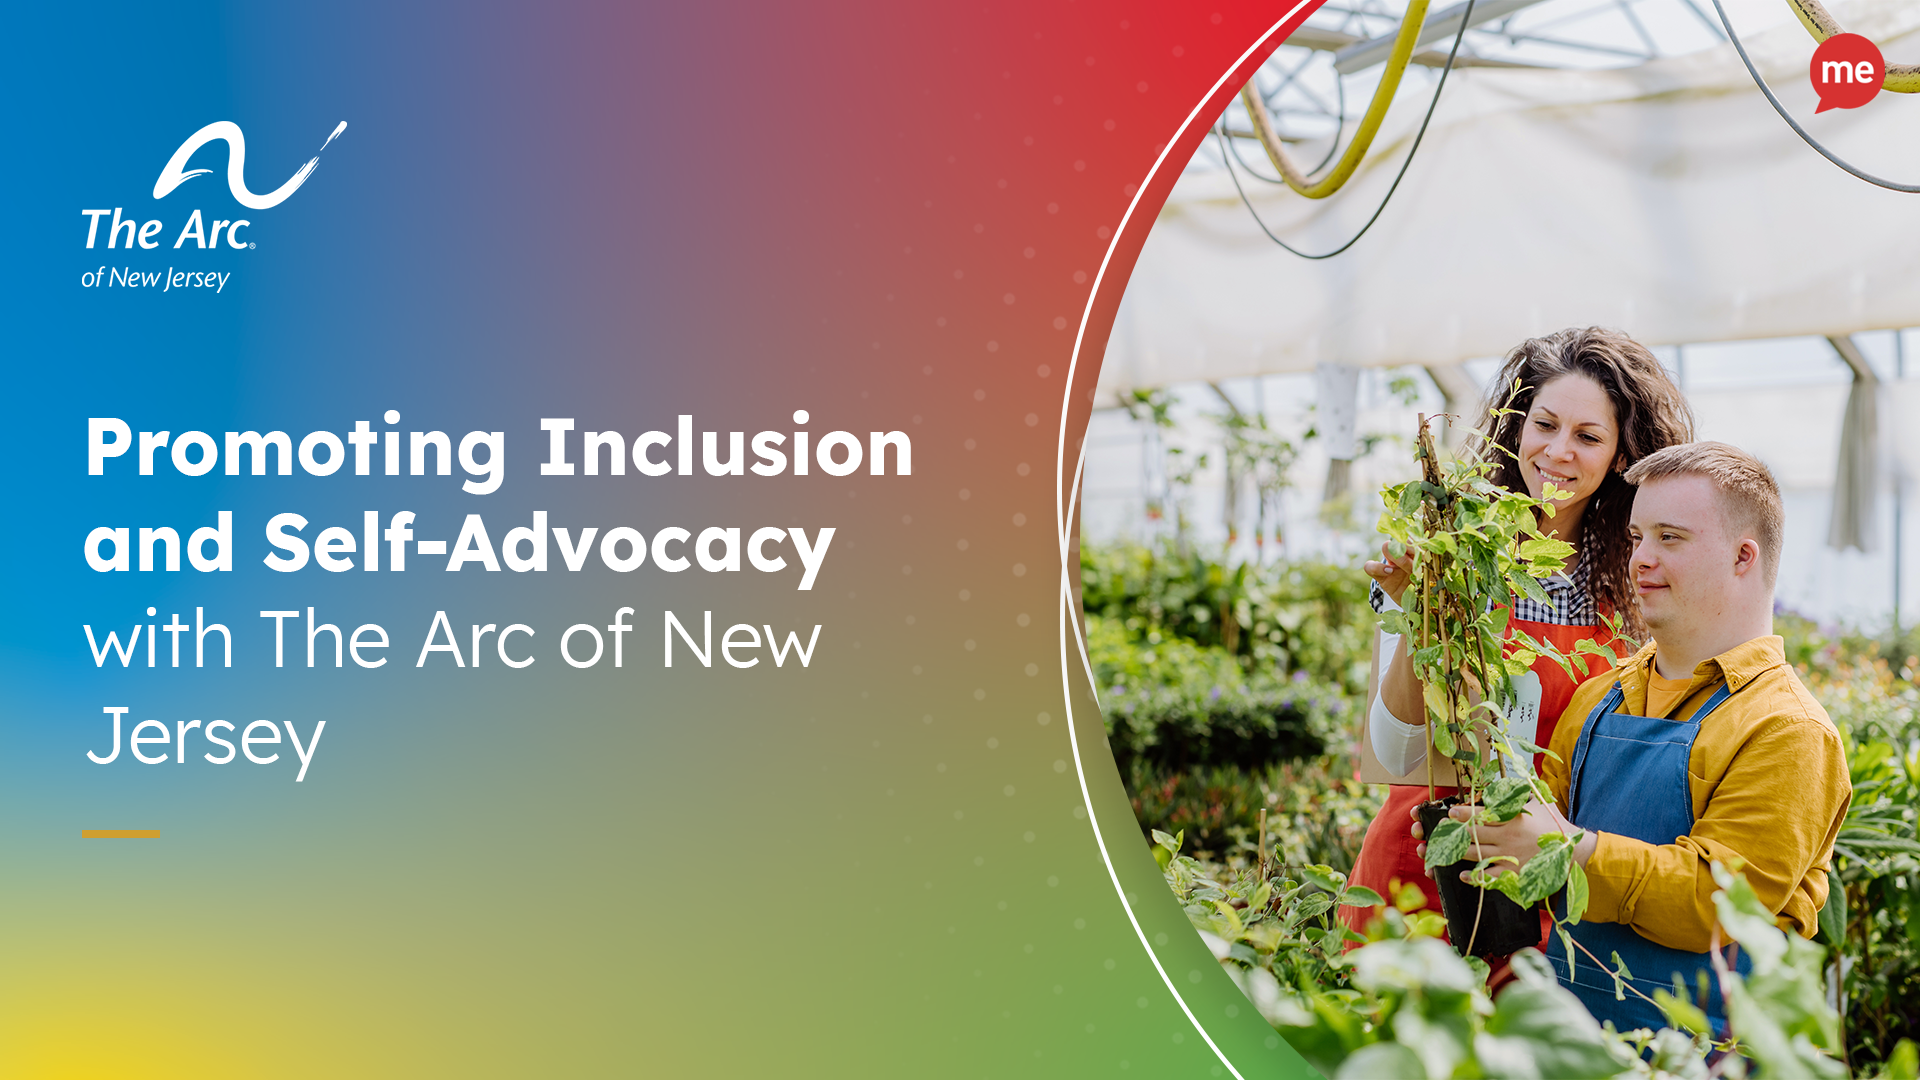 Promoting Inclusion and Self-Advocacy with the Arc of New Jersey